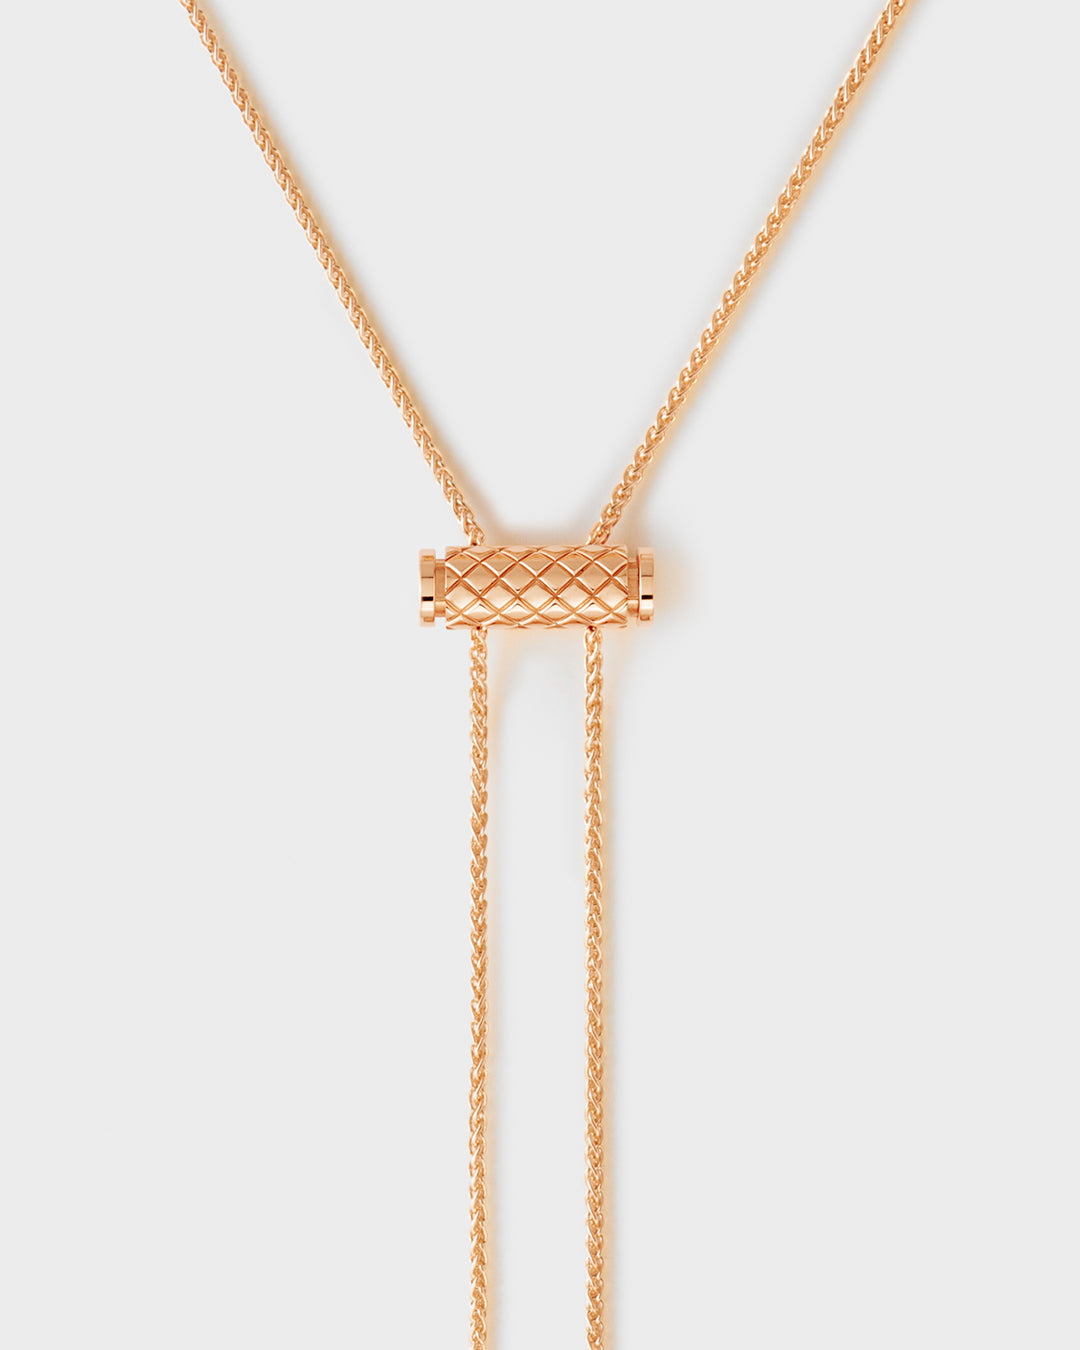 Gold Latch Pendant on GM Chain in Rose Gold - 1 - Nouvel Heritage